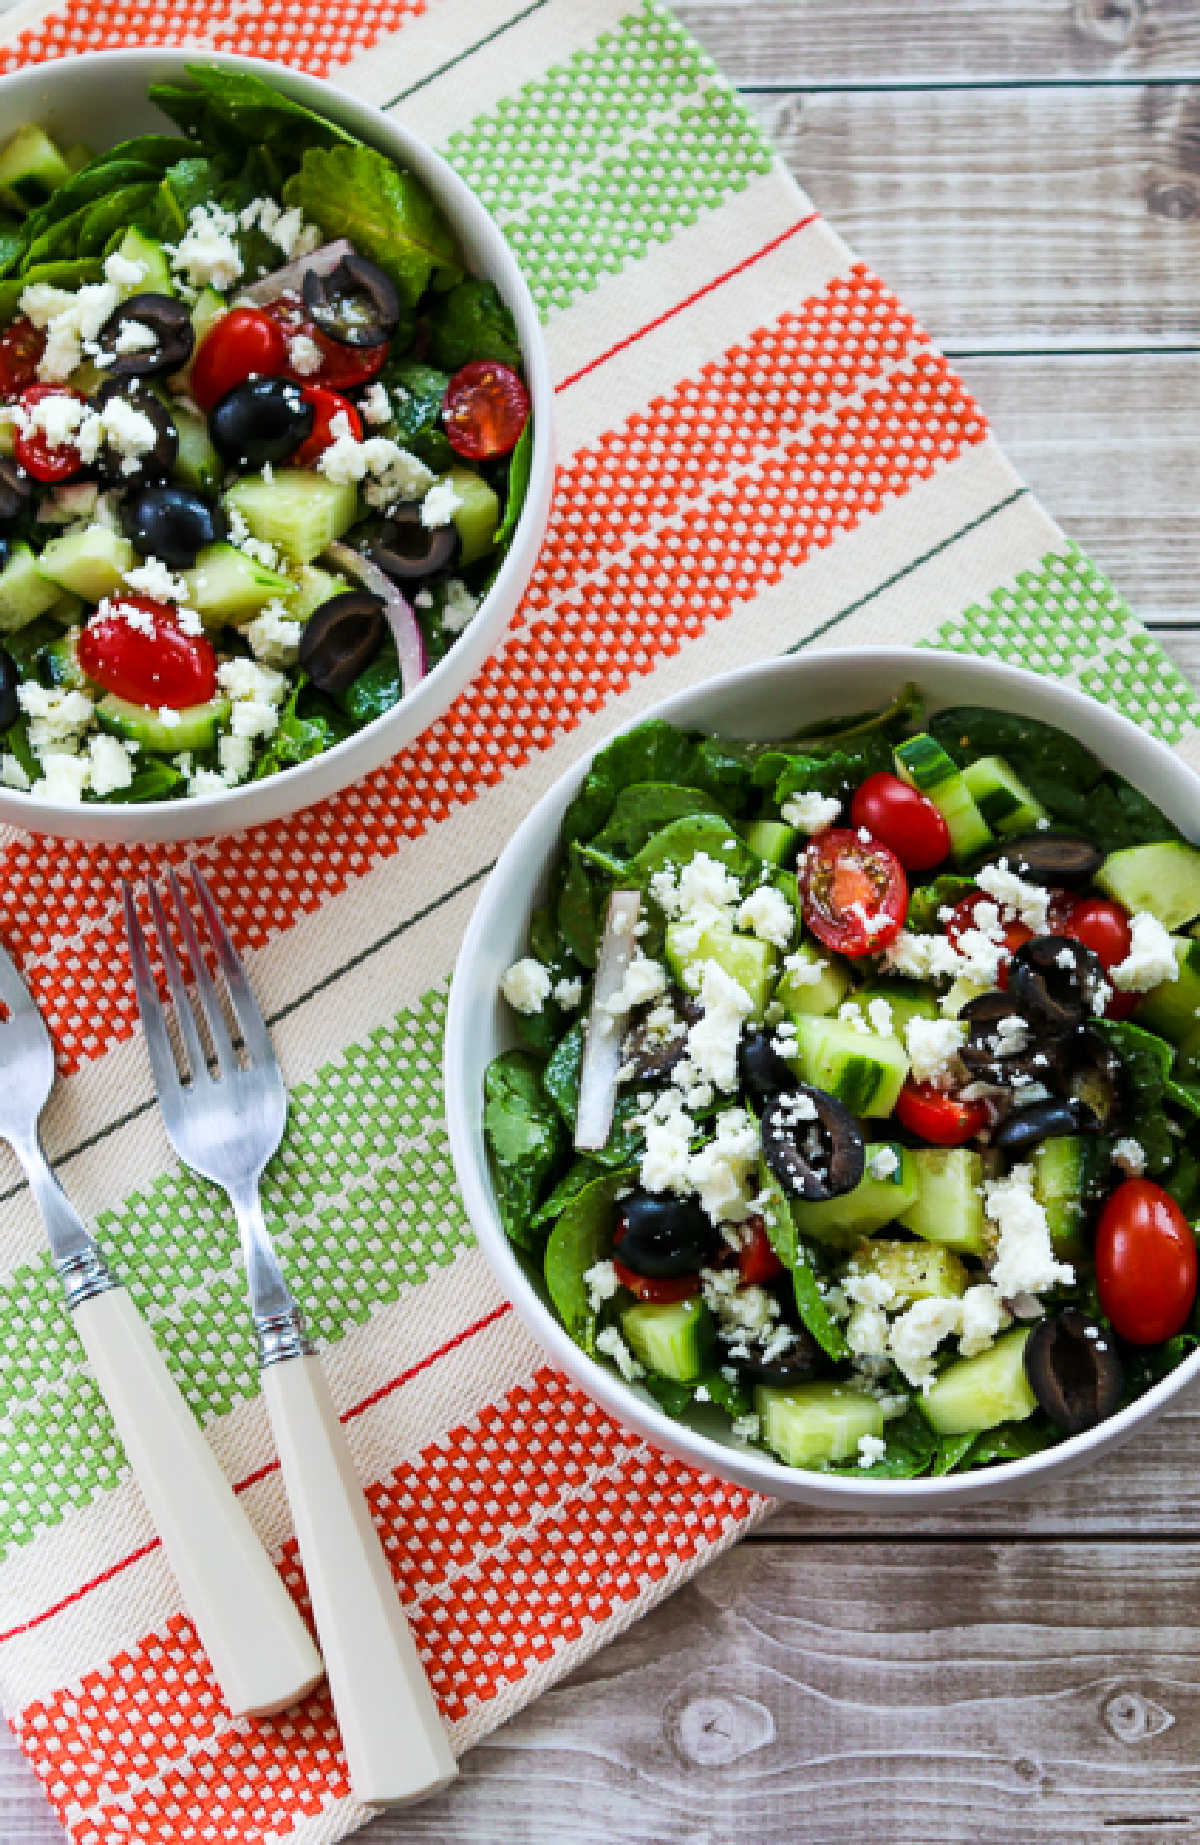 Kale Greek Salad shown in two bowls with forks and napkin